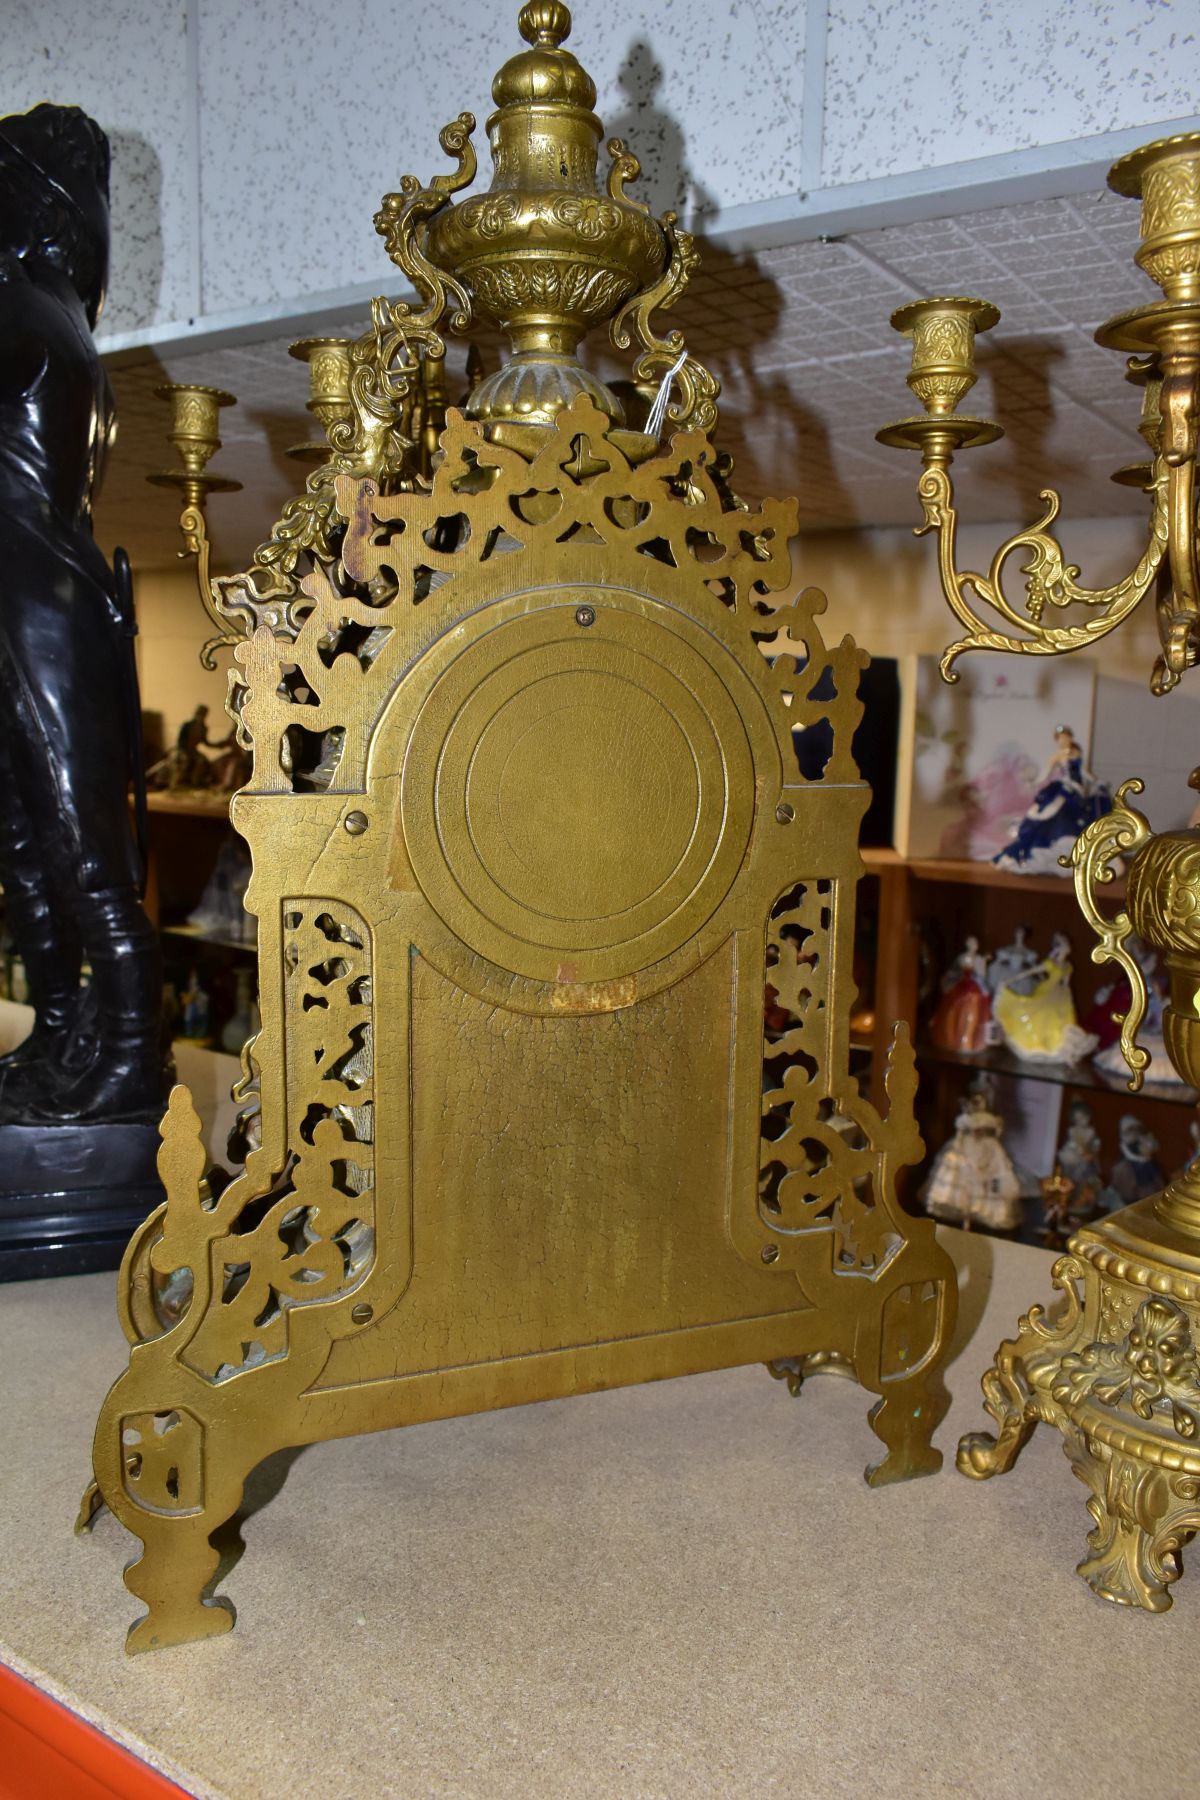 A REPRODUCTION BRASS CLOCK GARNITURE, the clock with ornate cast brass case with twin handled urn - Image 7 of 9